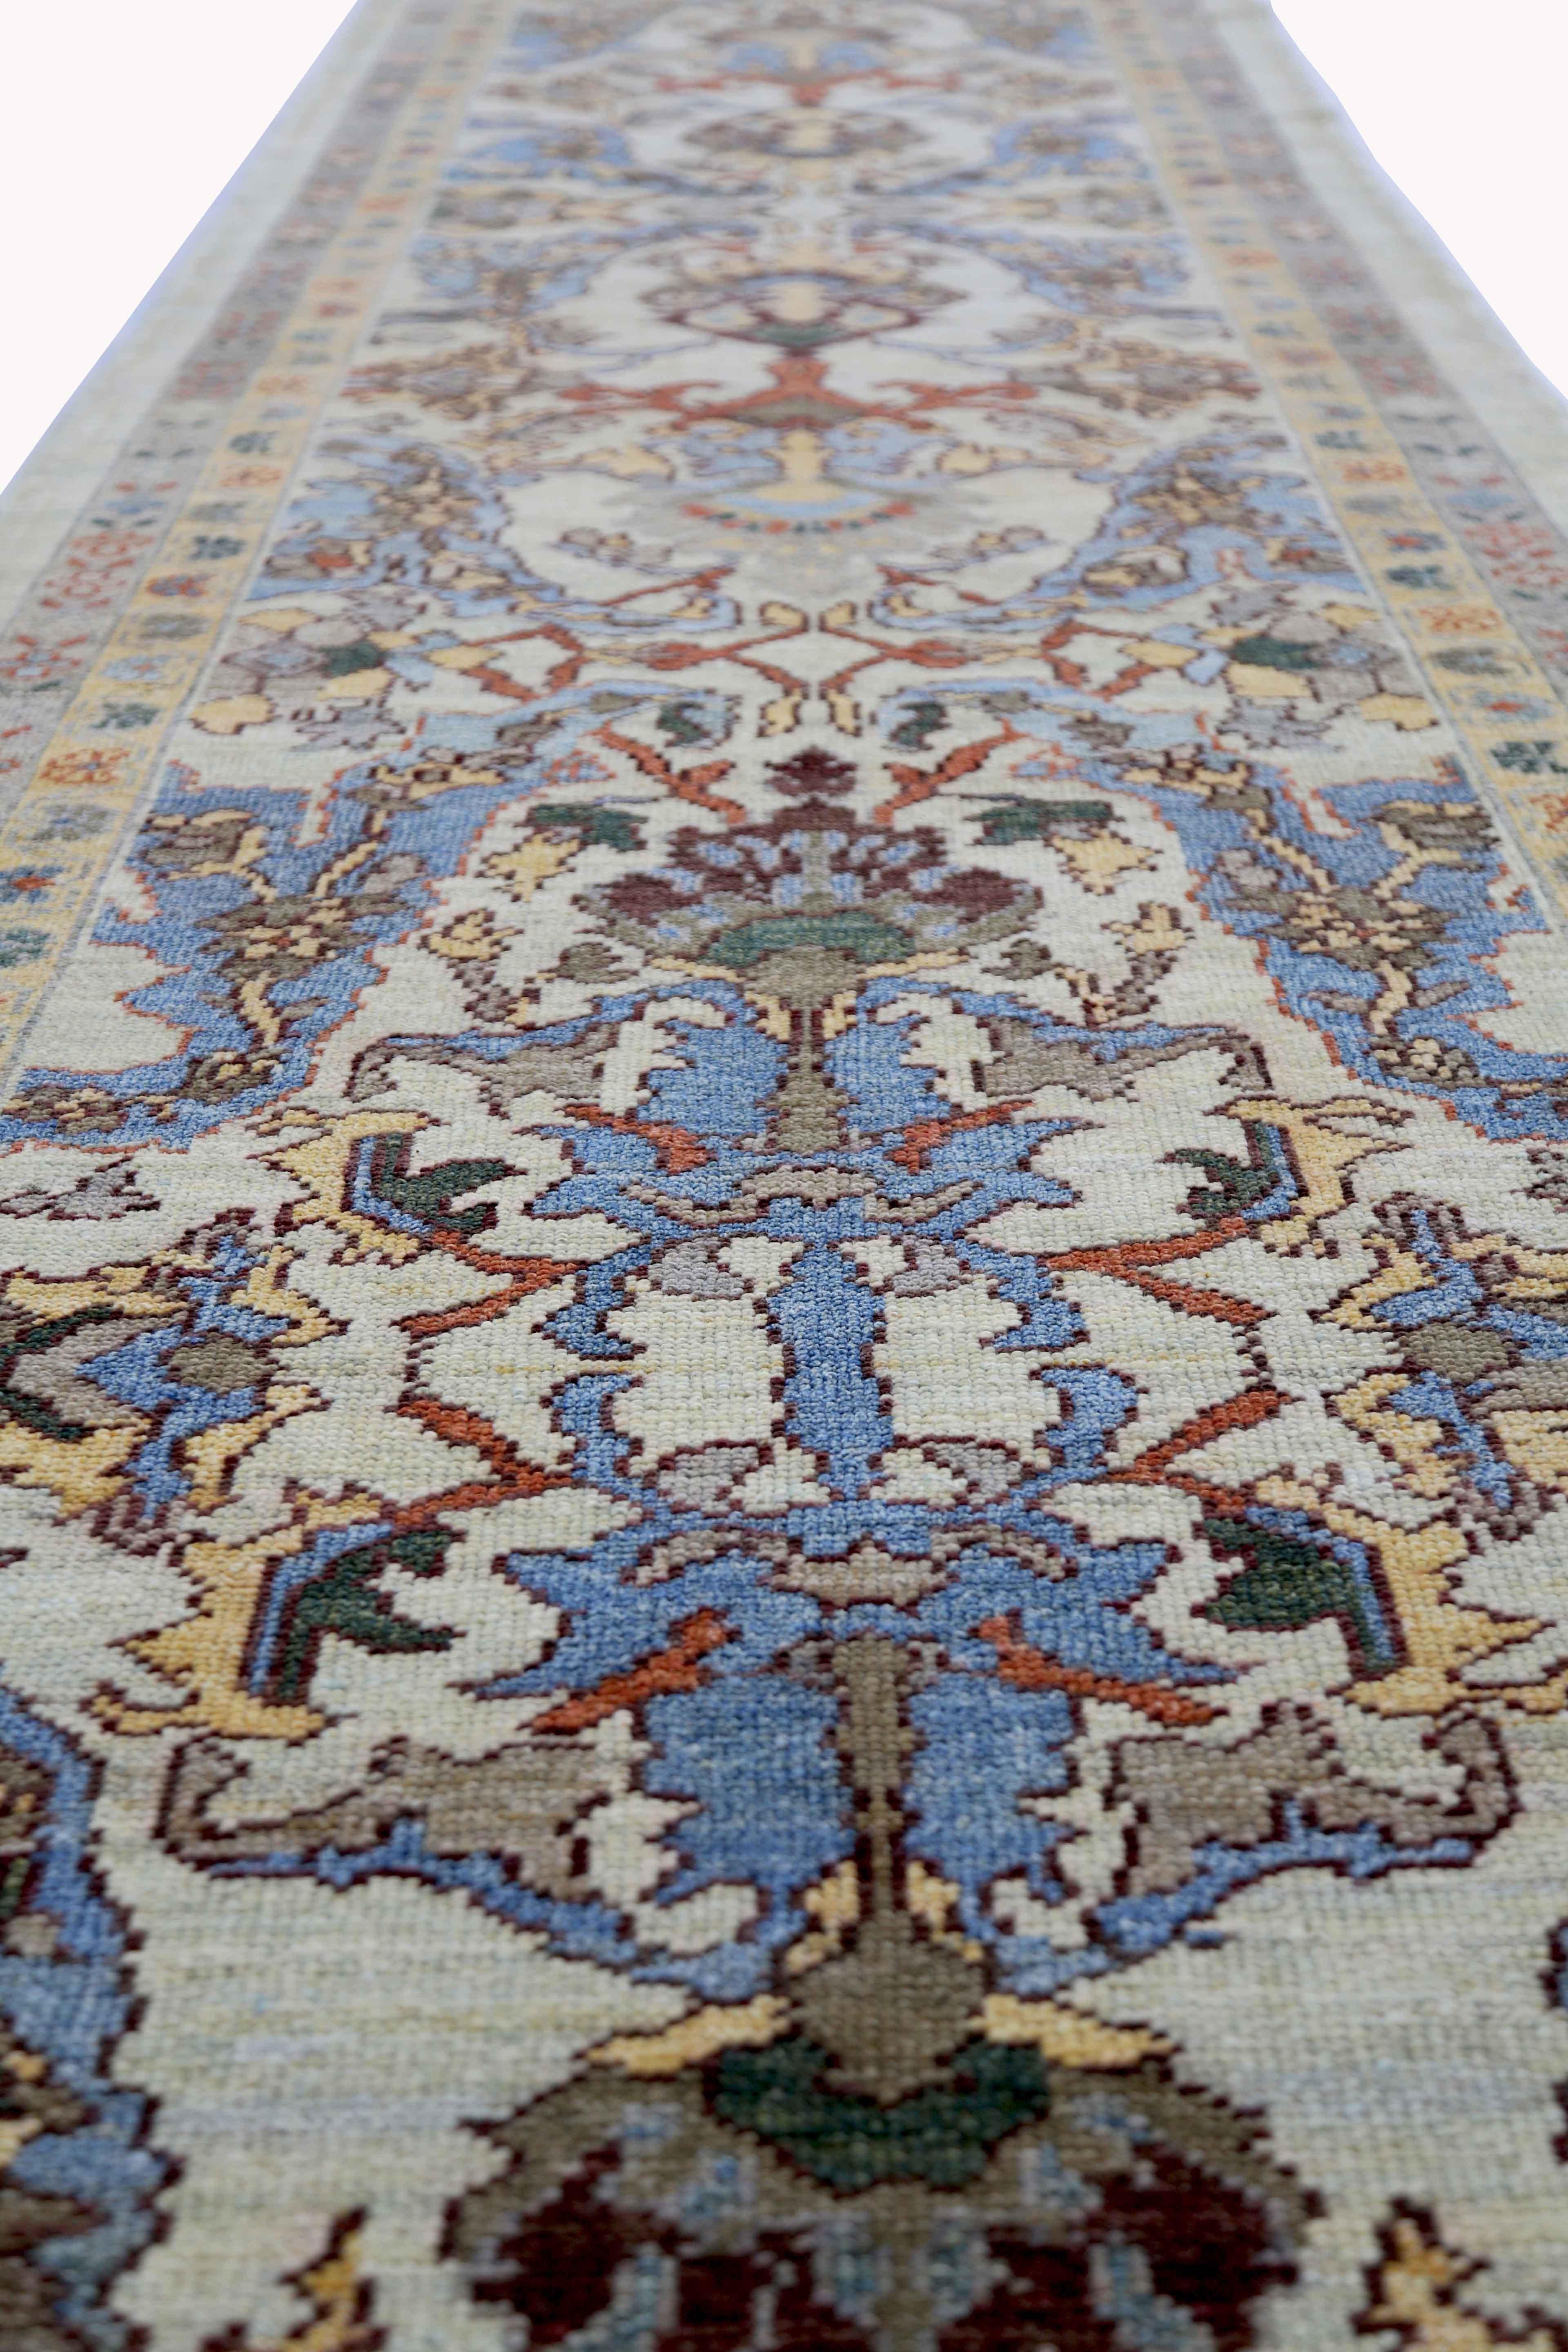 New Turkish rug made of handwoven sheep’s wool of the finest quality. It’s colored with organic vegetable dyes that are certified safe for humans and pets alike. It features floral details in brown and blue over a lovely ivory field. Flower patterns